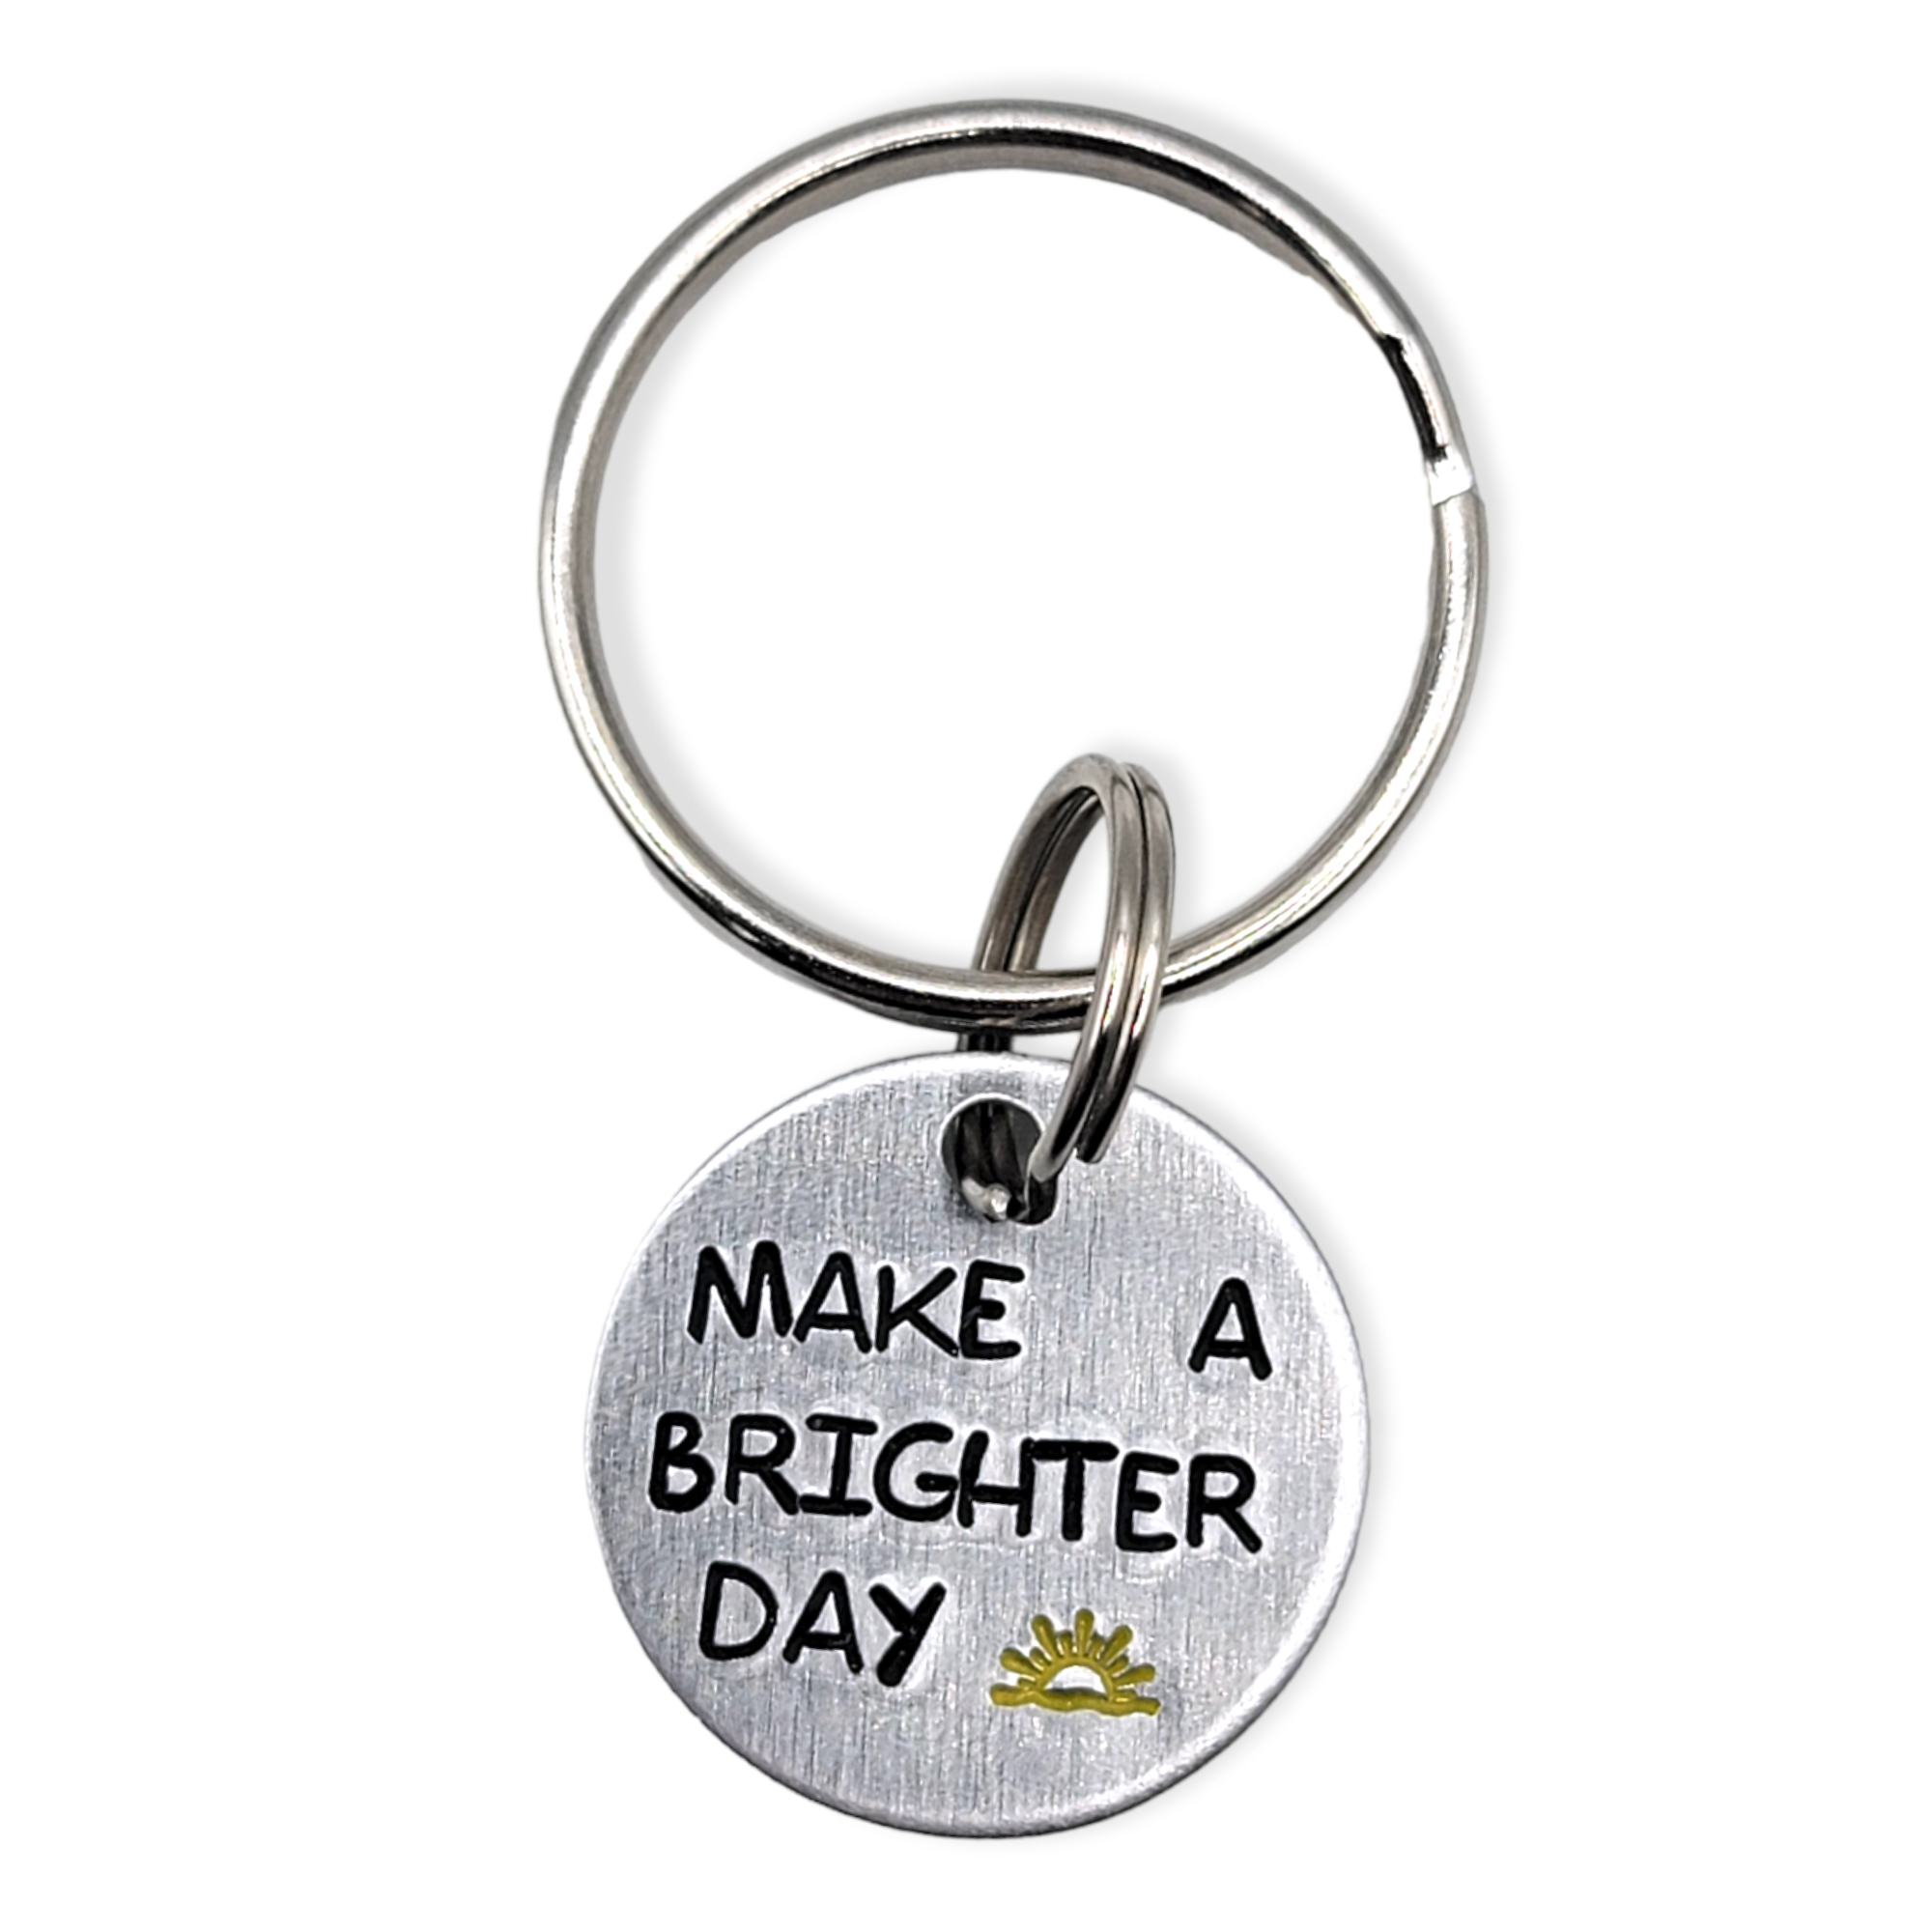 "Make a brighter Day" Hand Stamped Keychain - Travelers Trade Post